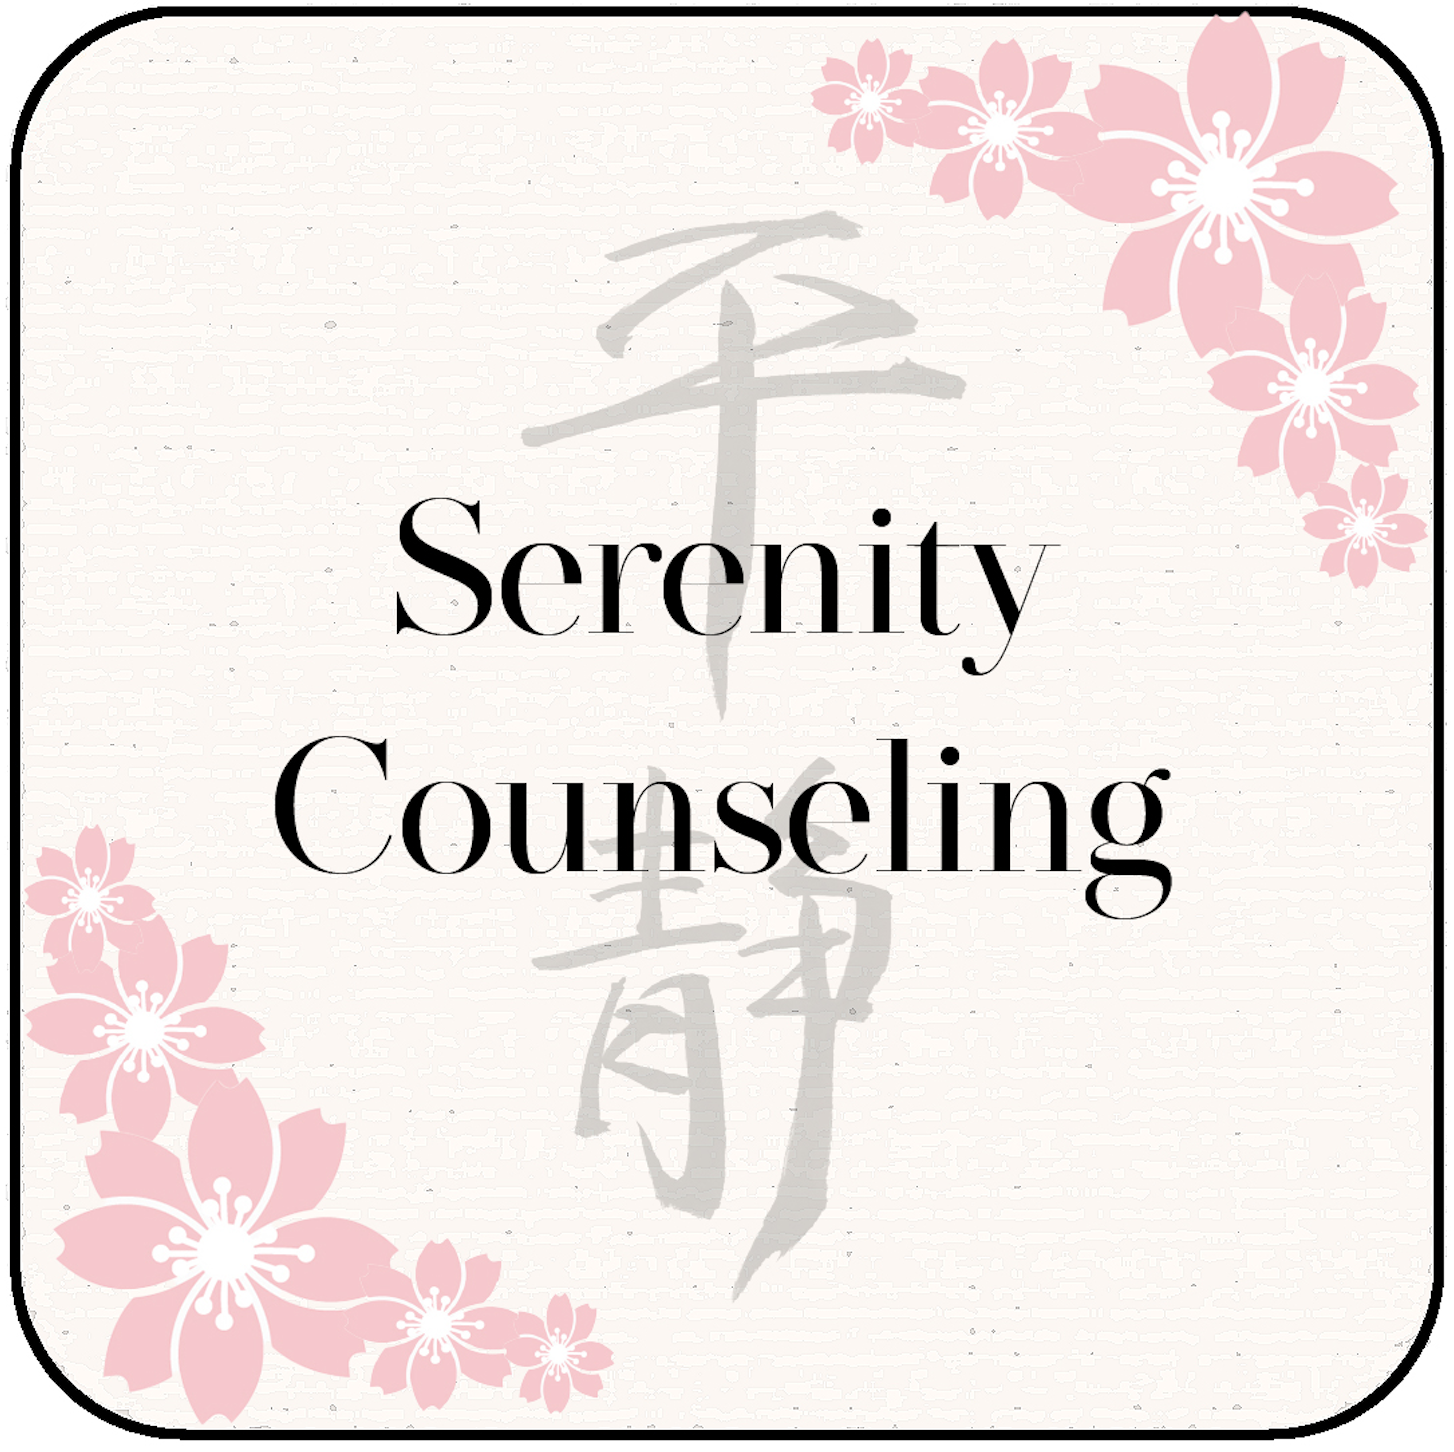 Serenity Counseling logo, symbolizing serenity after therapy